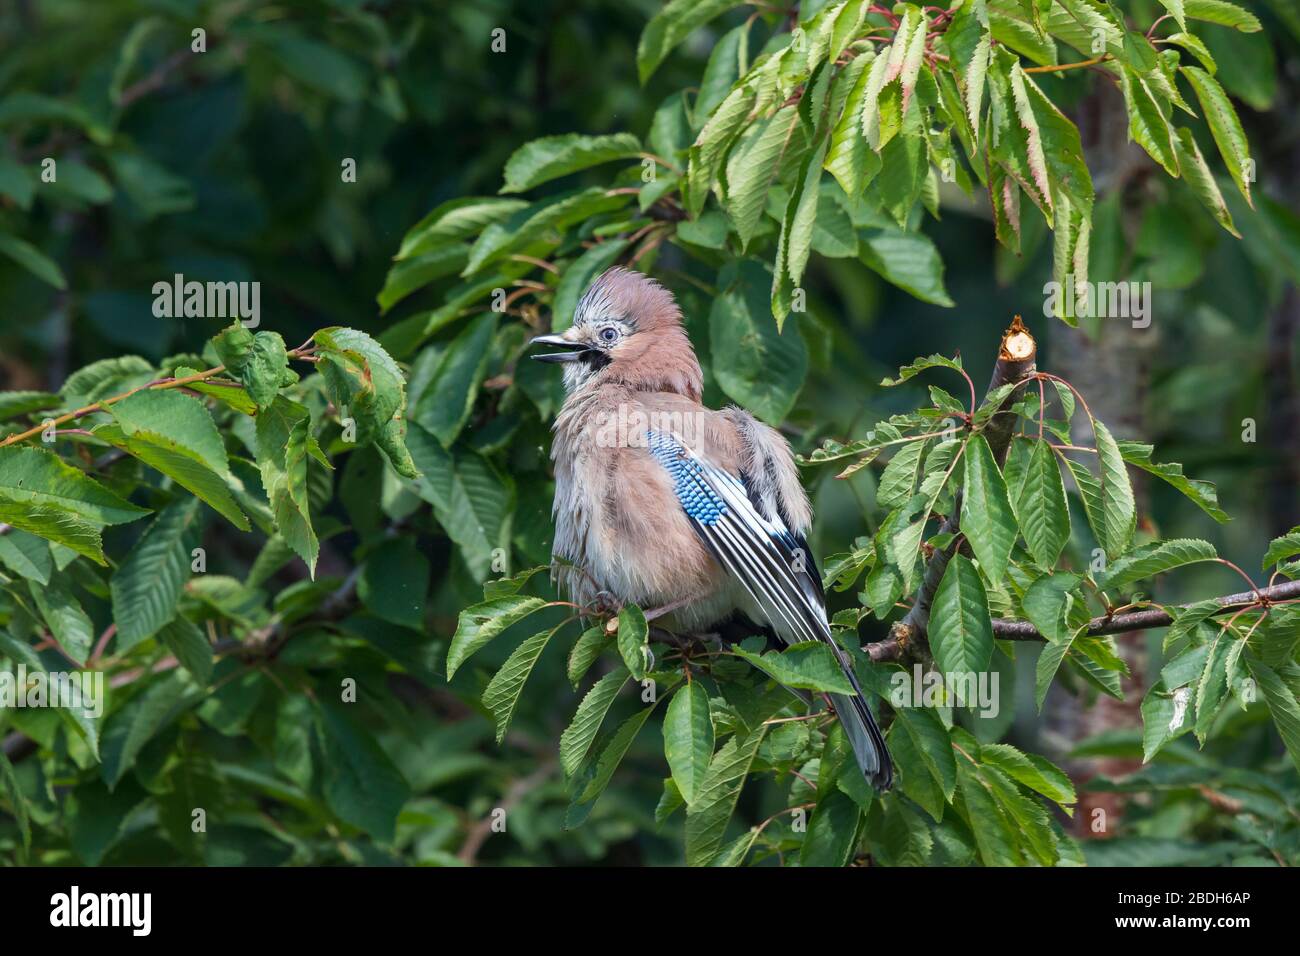 Close up of wild UK jay bird (Garrulus glandarius) isolated outdoors perching in a UK garden cherry tree fluffing up feathers. Jay feathers detail. Stock Photo